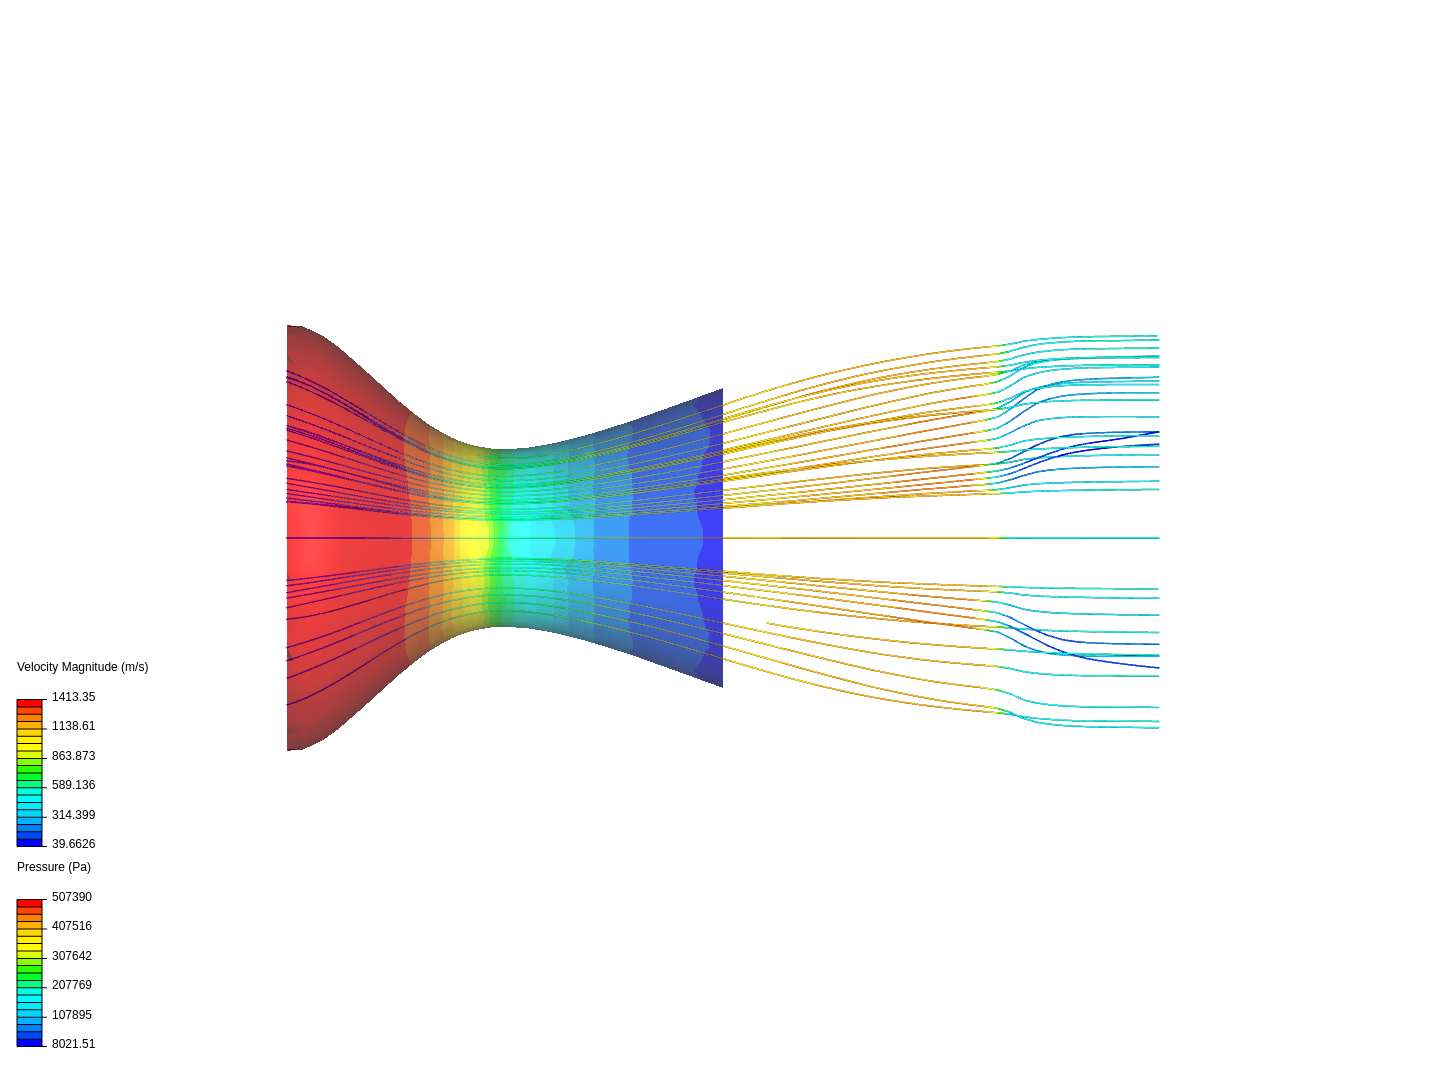 The shock wave CFD case image